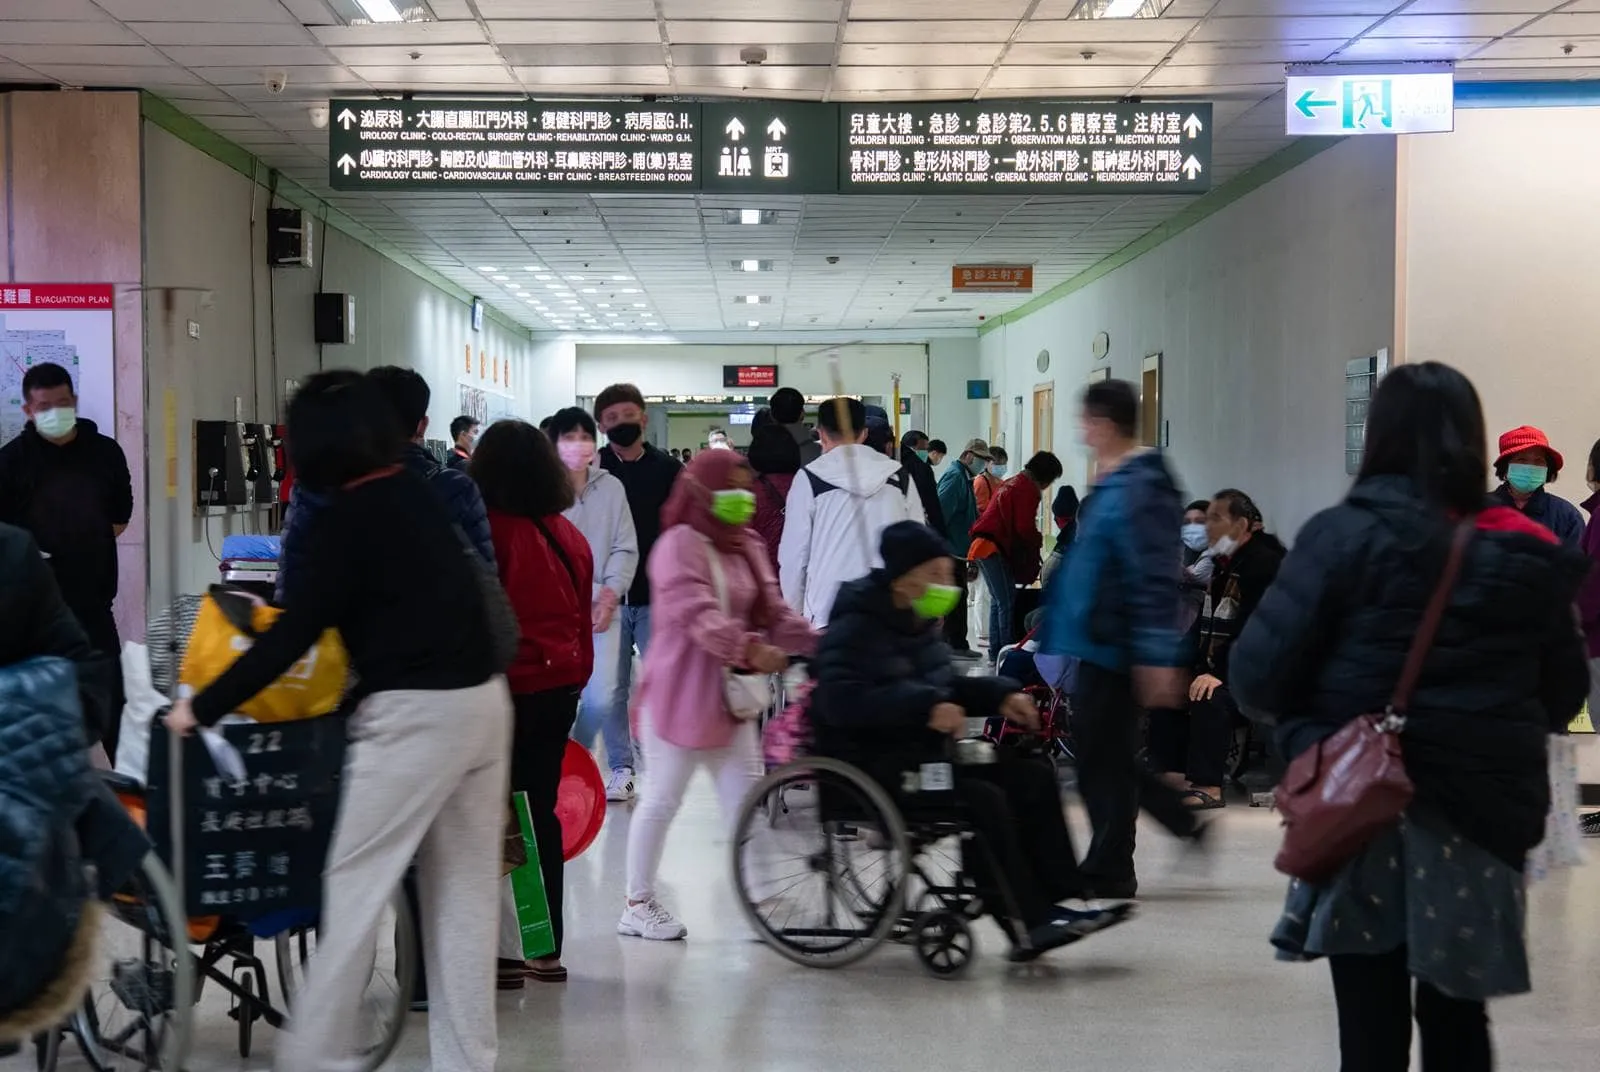 How can Taiwan fix its doctor shortage?